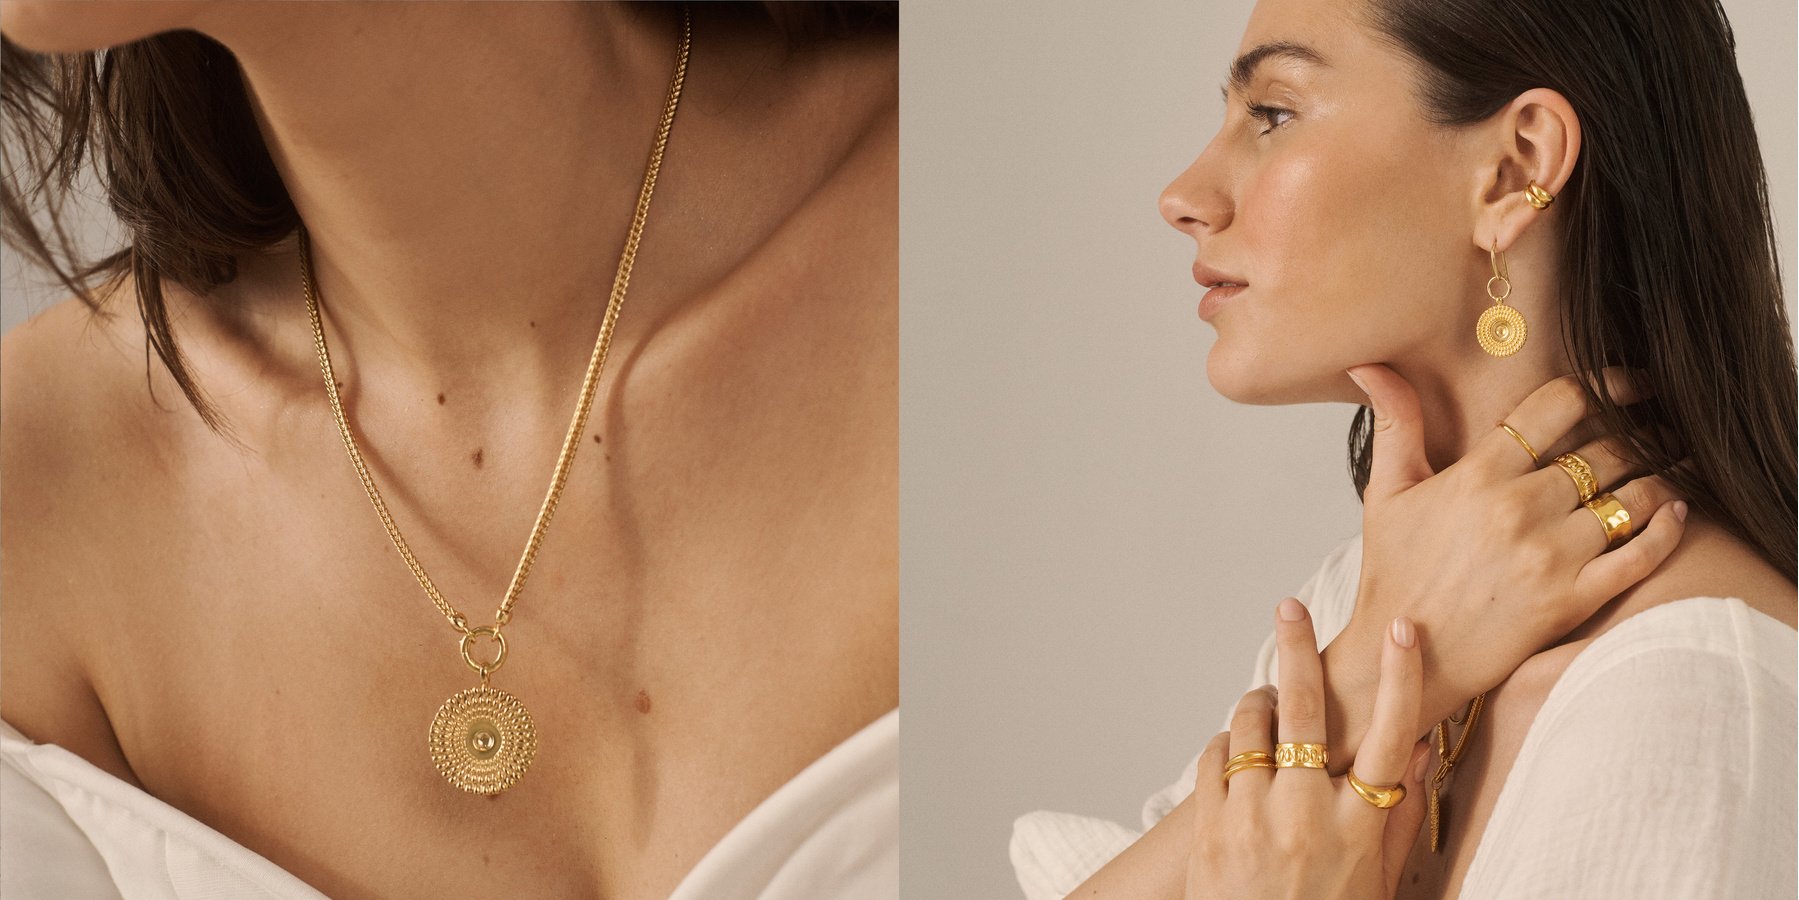 A model wears the Juno collection, featuring Greek shield-inspired pieces.